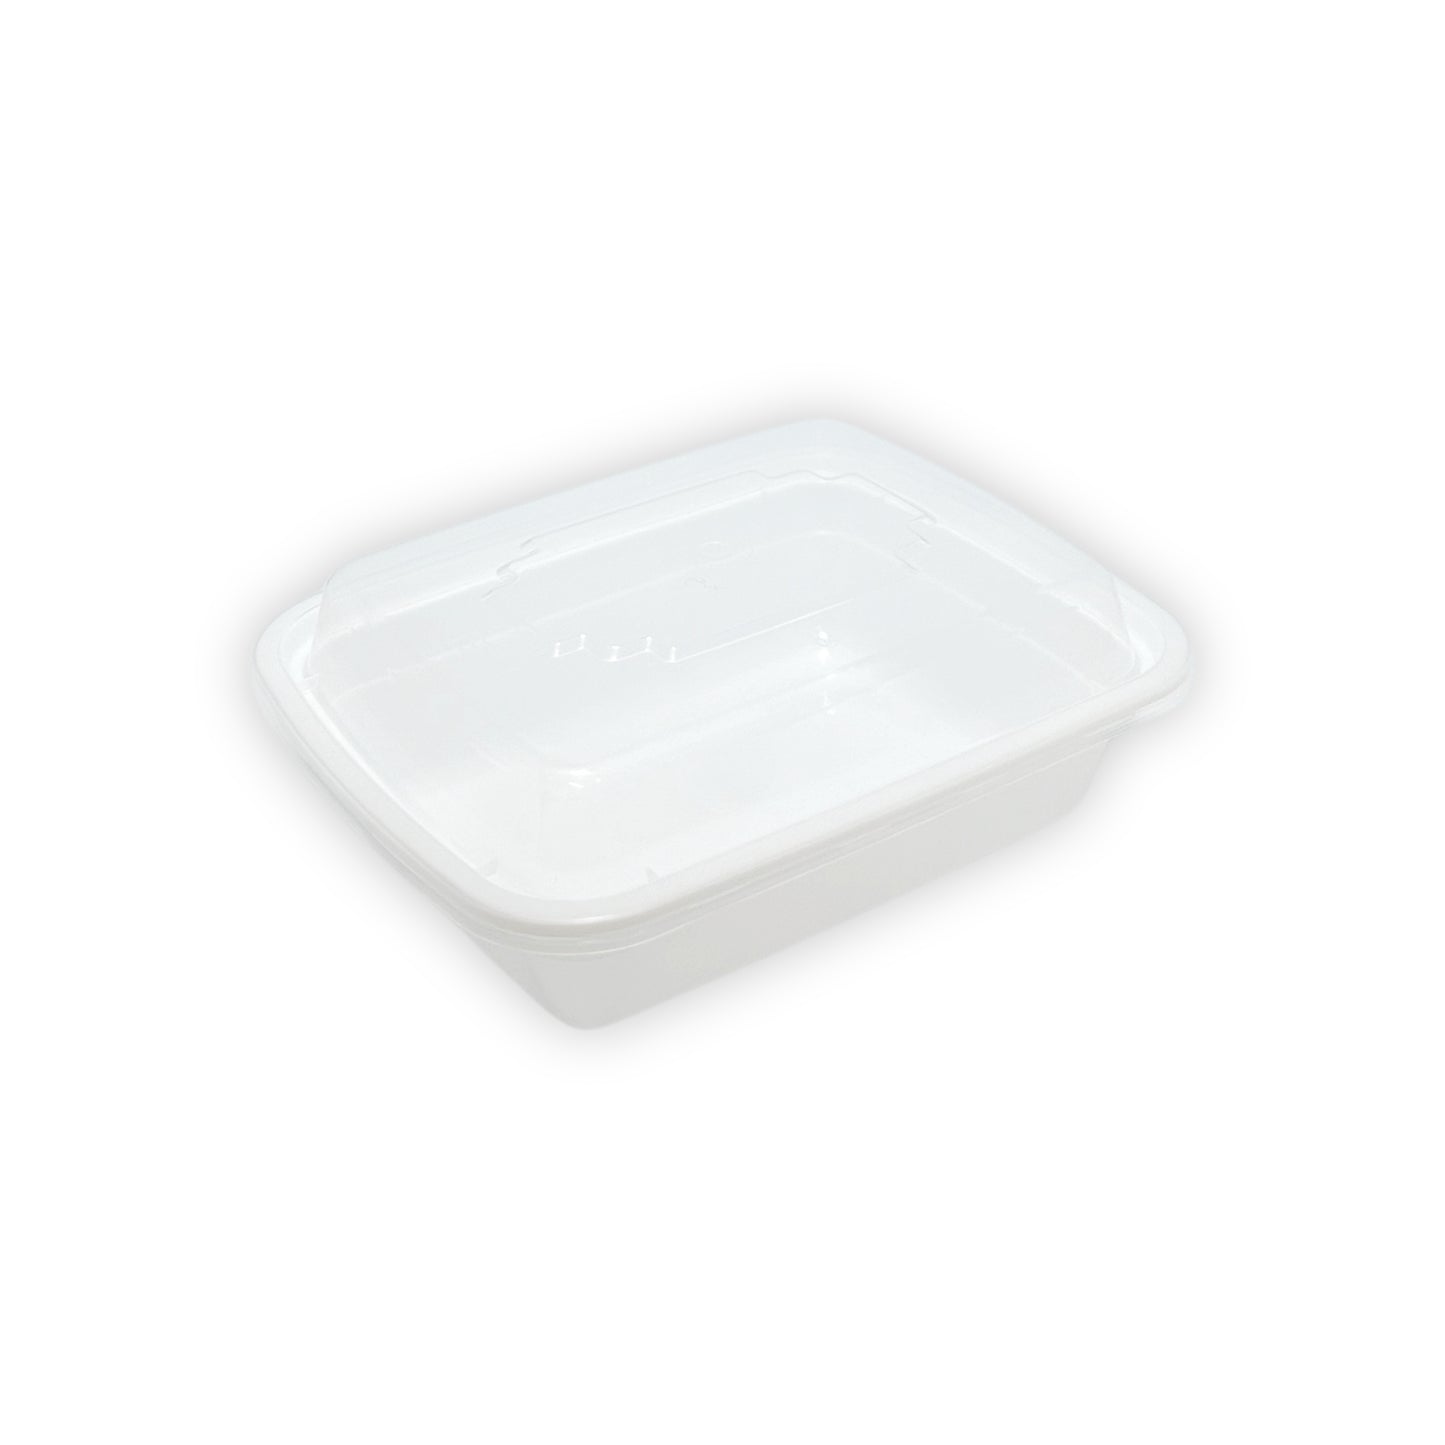 KIS-KY12G | 150sets 12oz, 355ml White PP Rectangle Container with Clear Lids Combo; $0.133/set